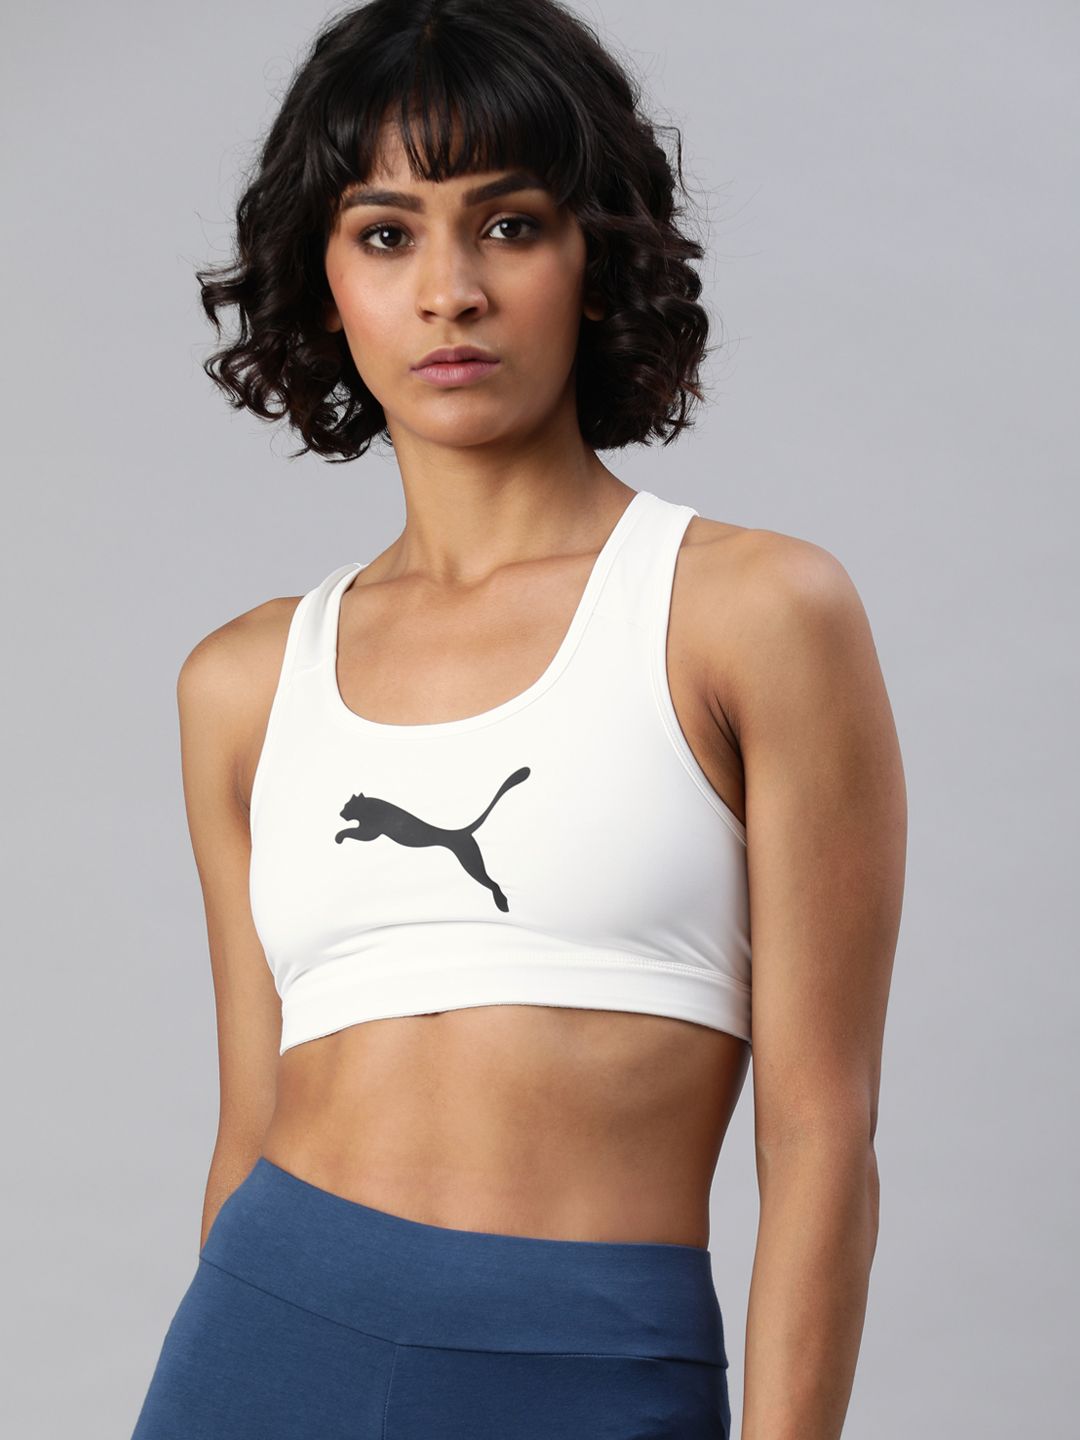 Puma White Printed Non-Wired Non Padded 4Keeps Workout Bra Price in India